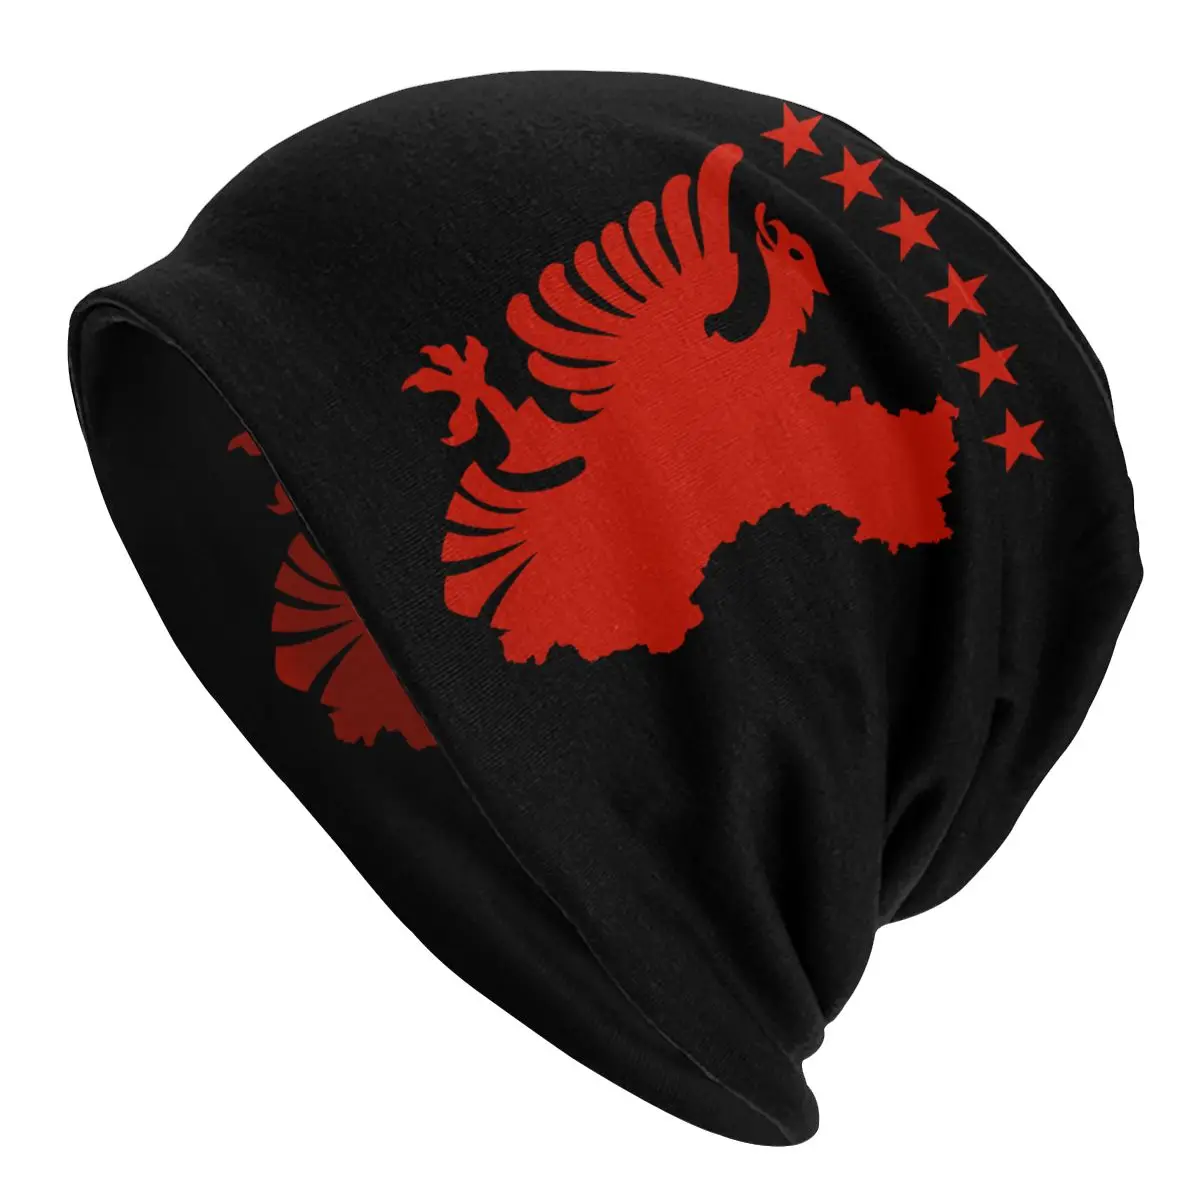 Shqipe Autochthonous Flag Essential Bonnet Femme Cool Knitted Hat For Women Men Warm Winter Kosovo Albania Eagle Beanies Caps 1